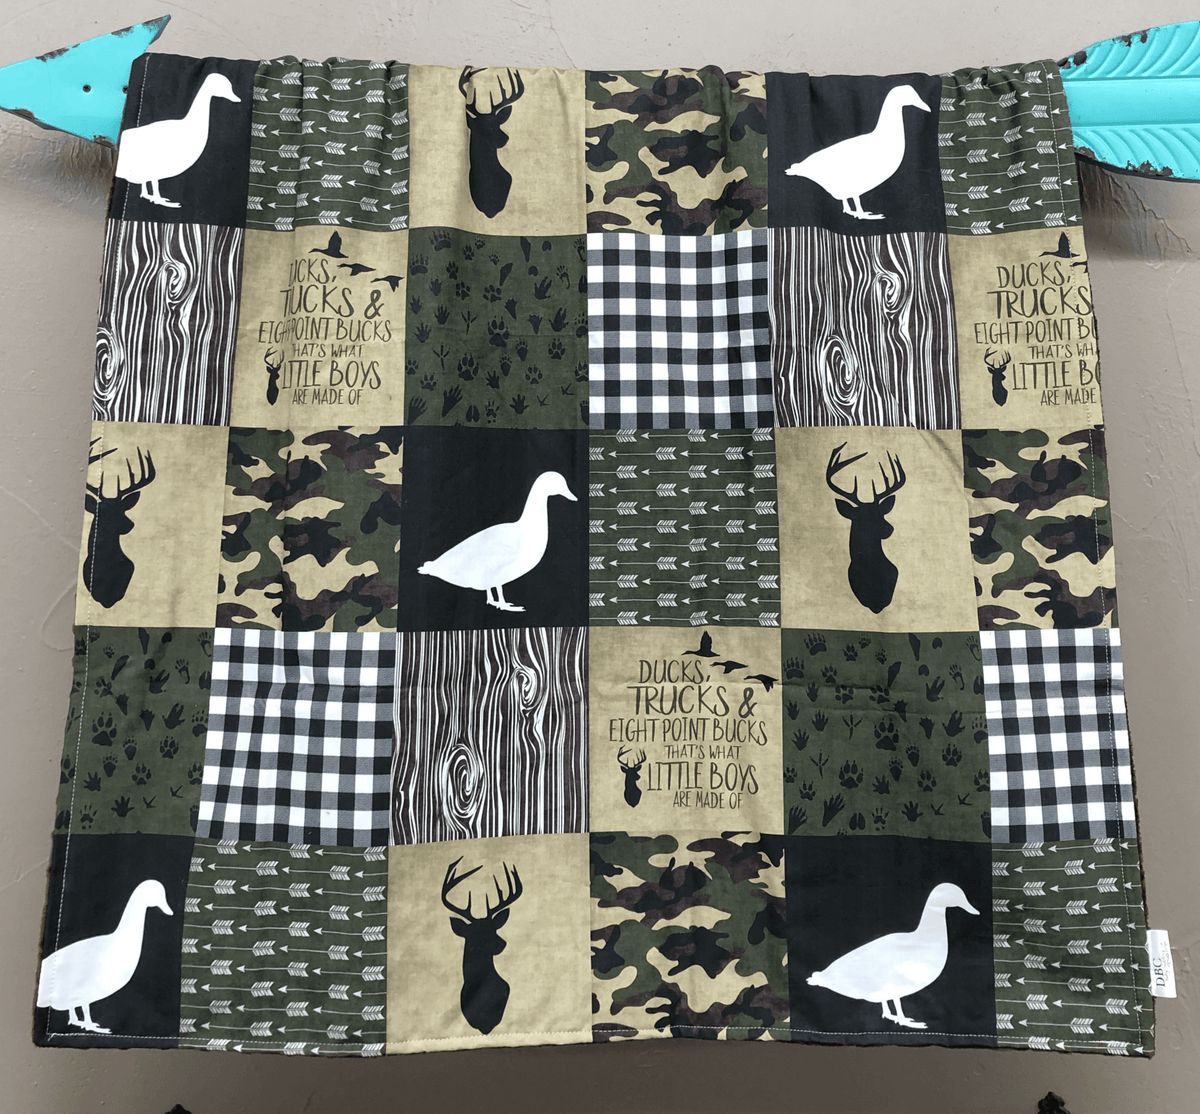 Twin, Full, or Queen Comforter - Ducks, Trucks, Bucks Patchwork Print in olive and brown - DBC Baby Bedding Co 